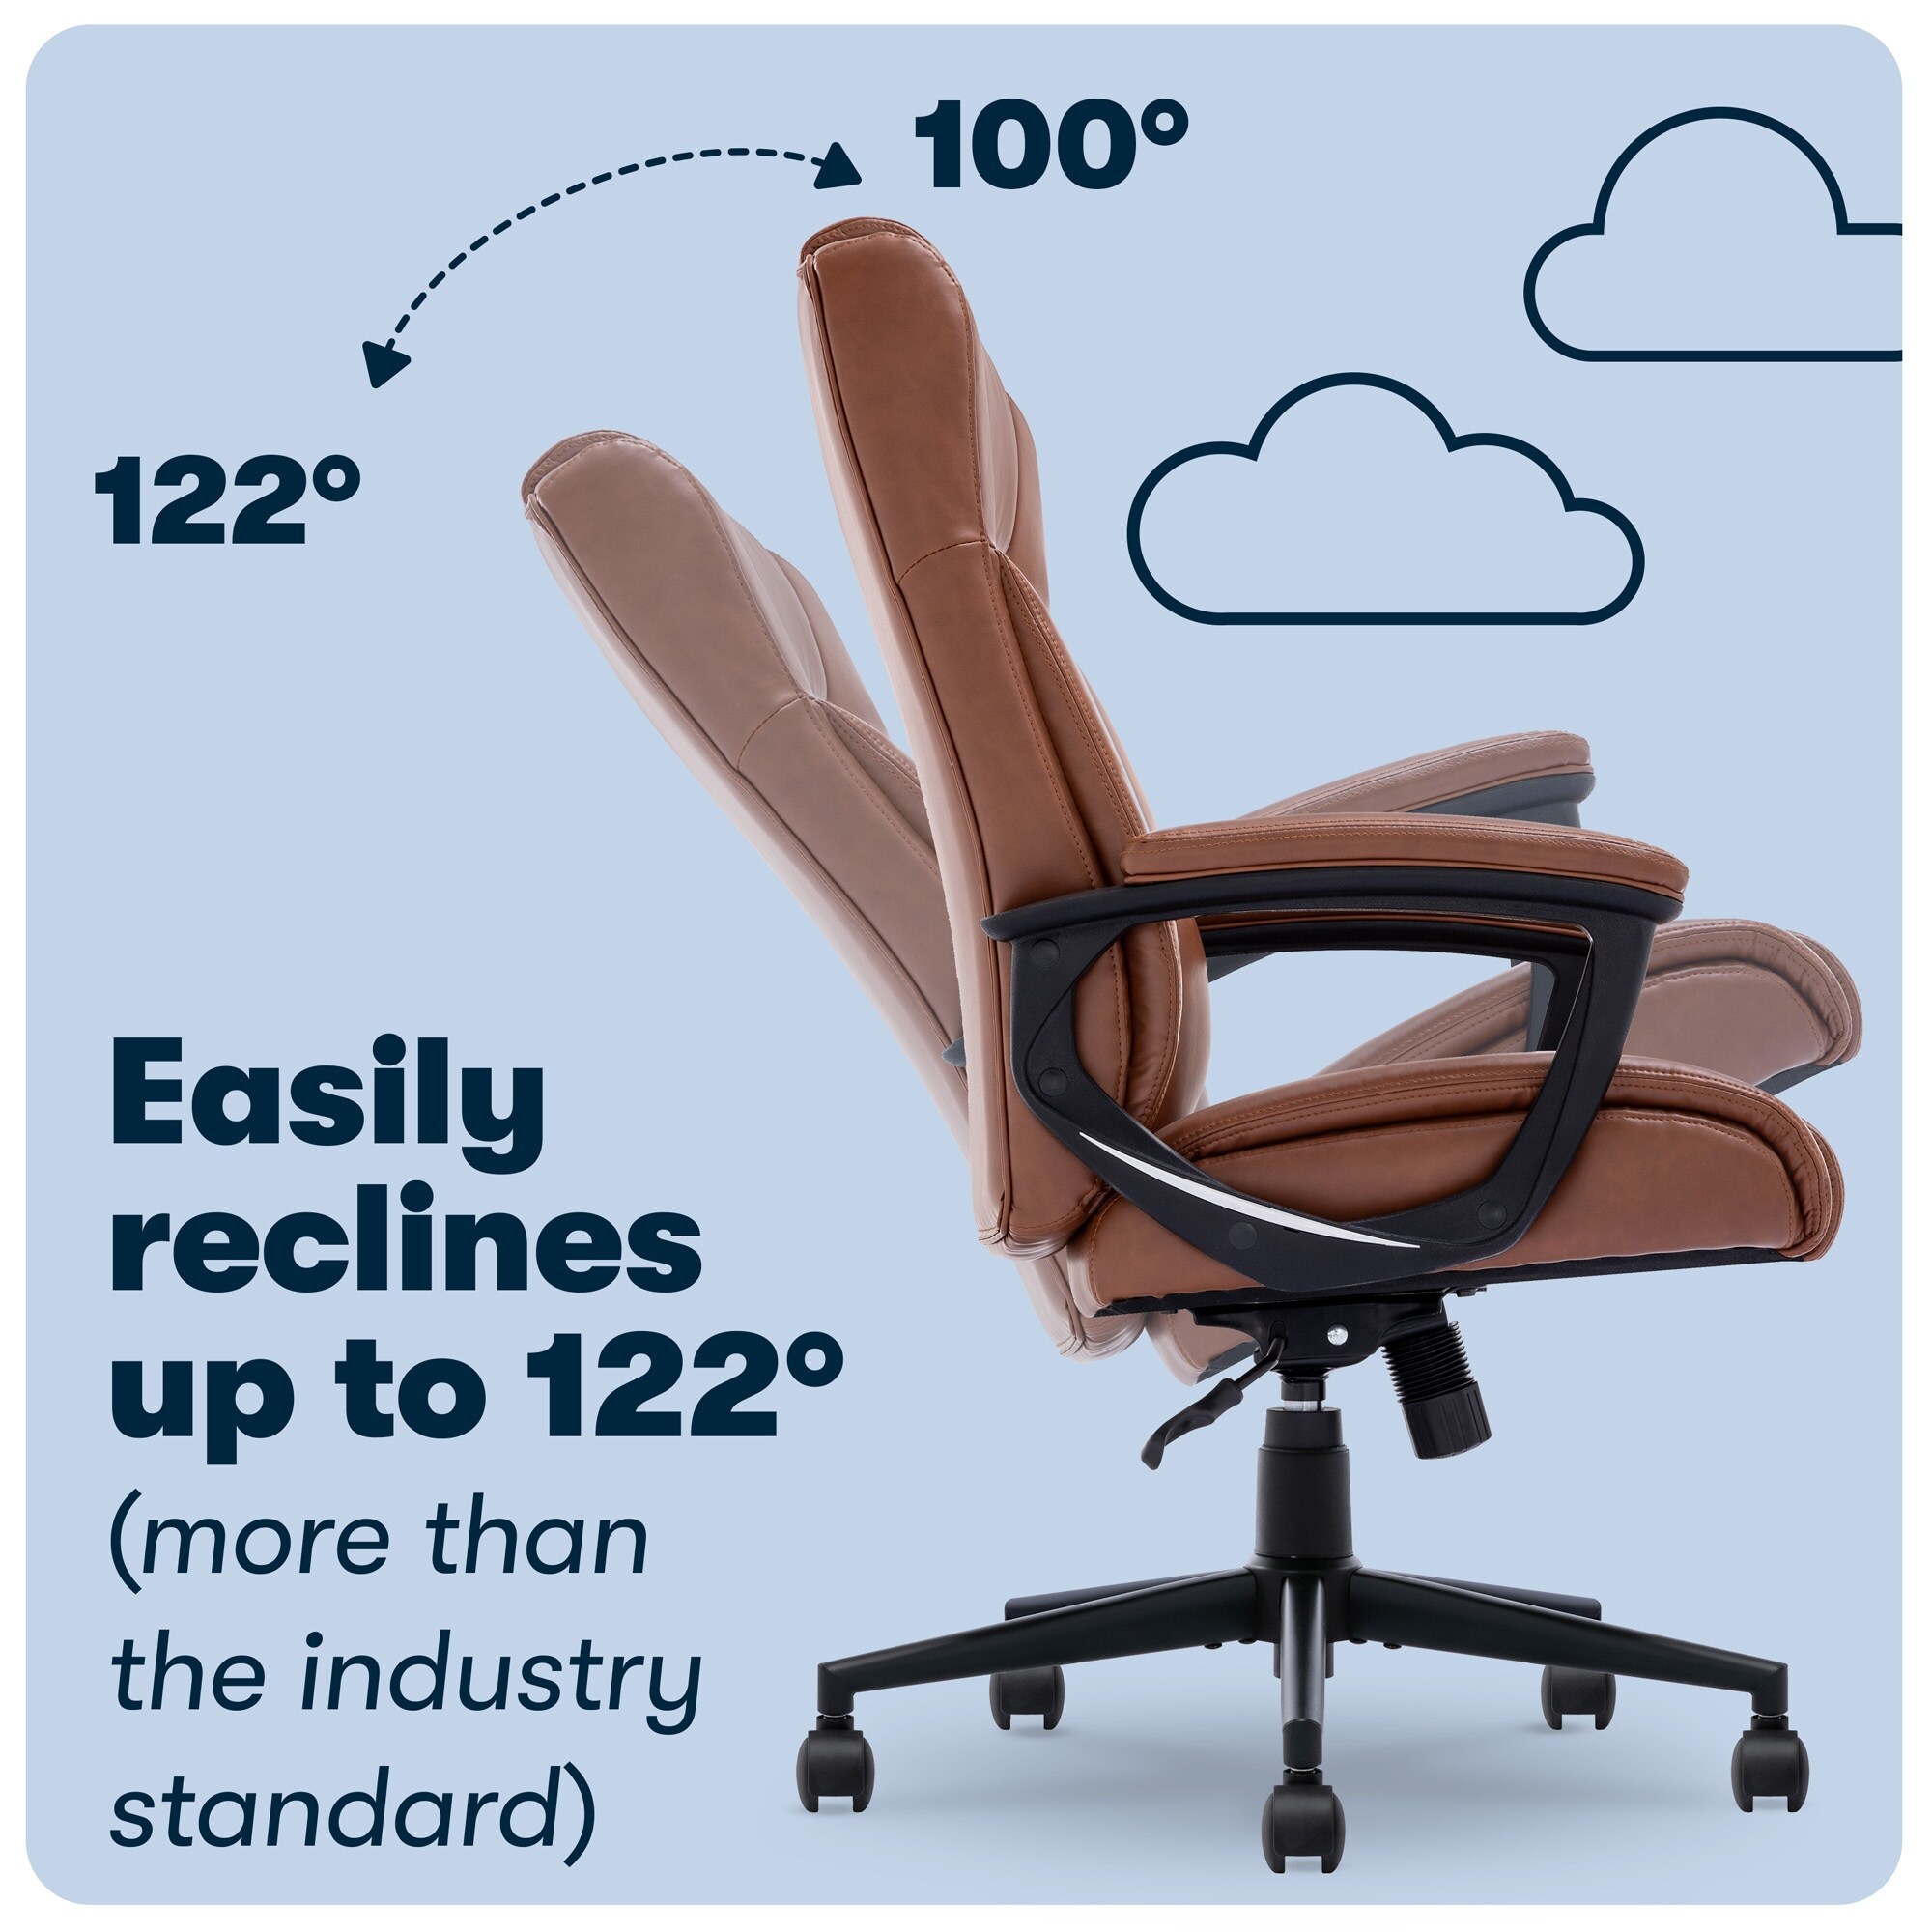 https://ak1.ostkcdn.com/images/products/is/images/direct/443197cb307cb08441478f390547870666e85f14/Serta-Connor-Executive-Office-Chair%2C-Ergonomic-Computer-Chair-with-Layered-Body-Pillows%2C-Contoured-Lumbar%2C-Adjustable-Seat.jpg